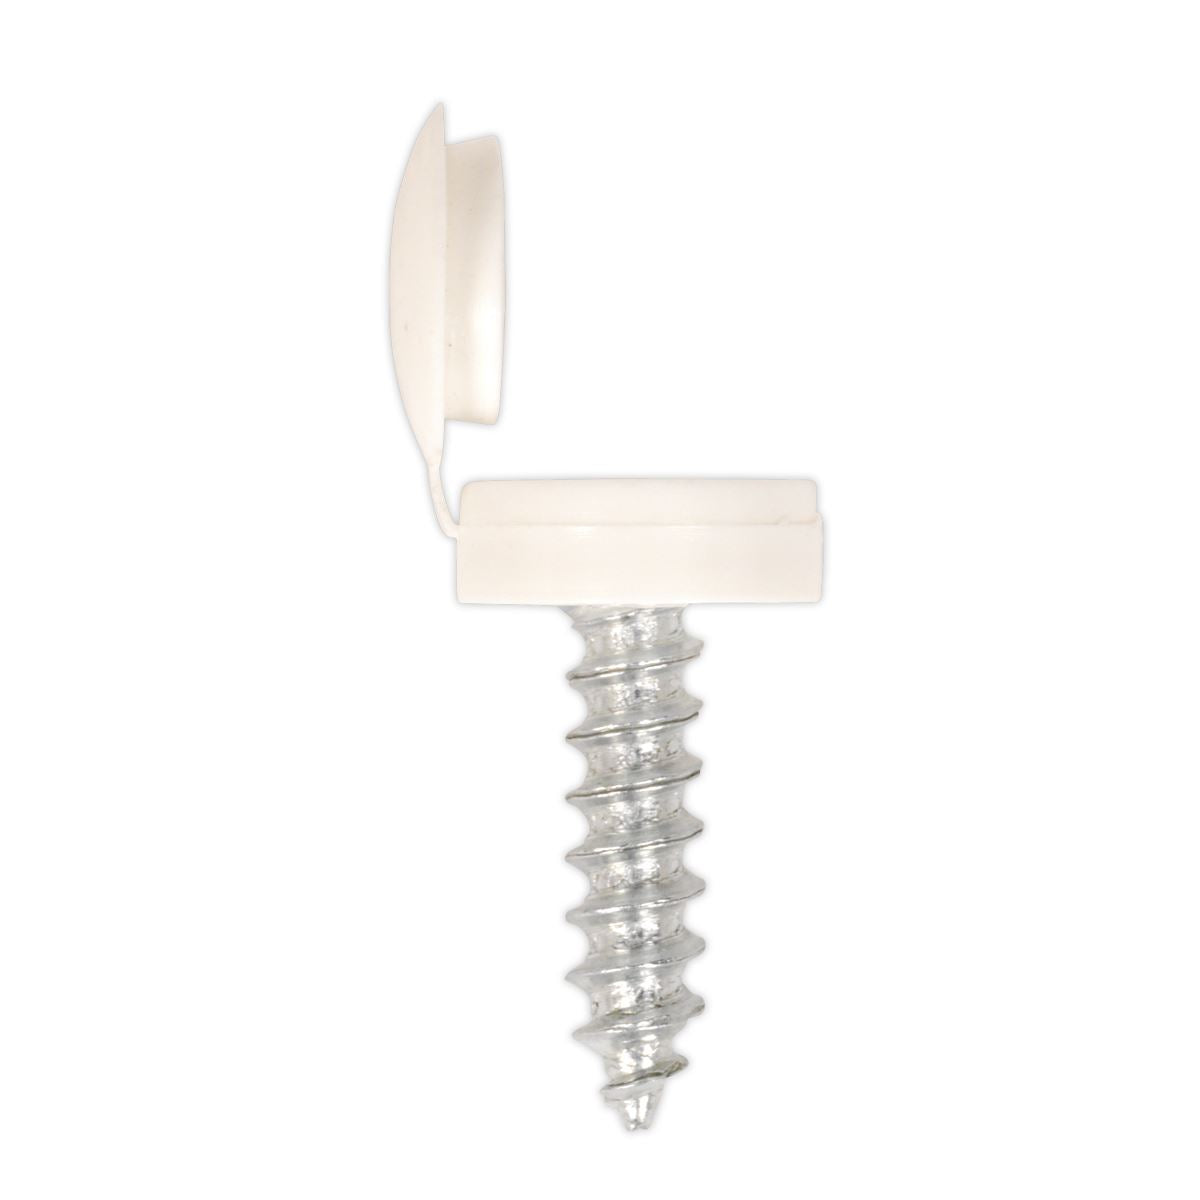 Sealey White Number Plate Screw & Flip Cap 4.2 x 19mm - Pack of 50